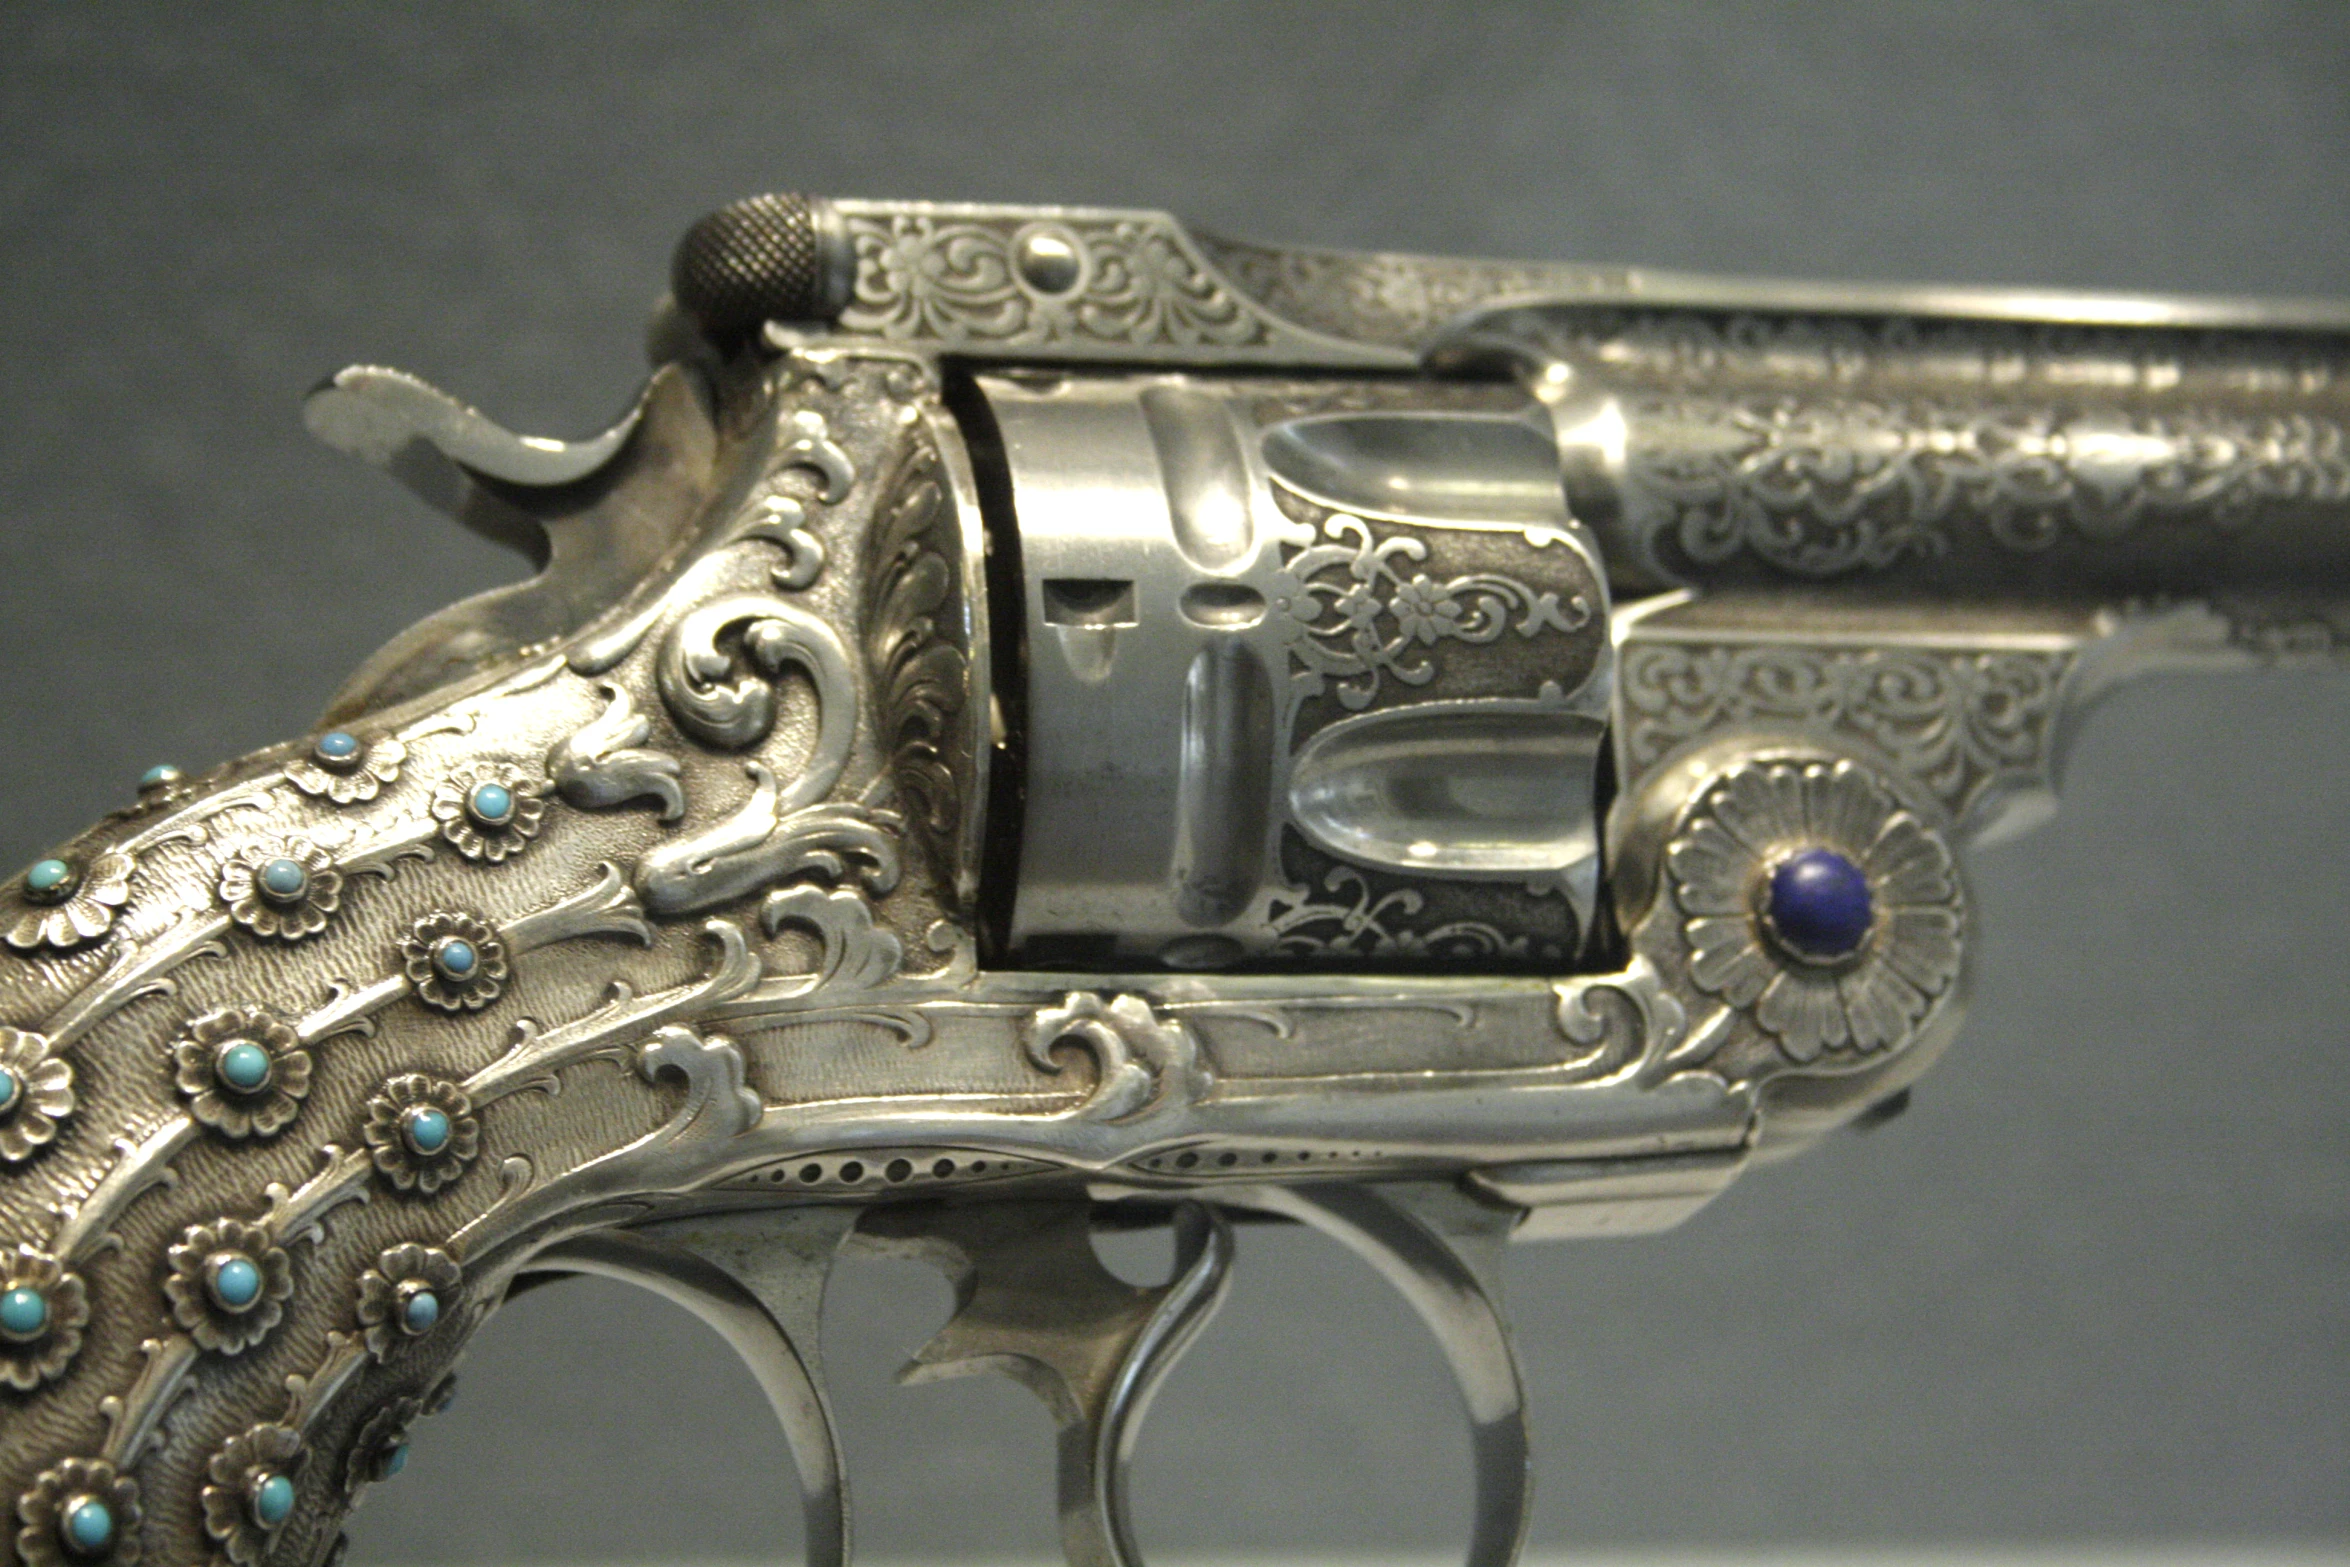 the antique pistol is sitting on display on a stand